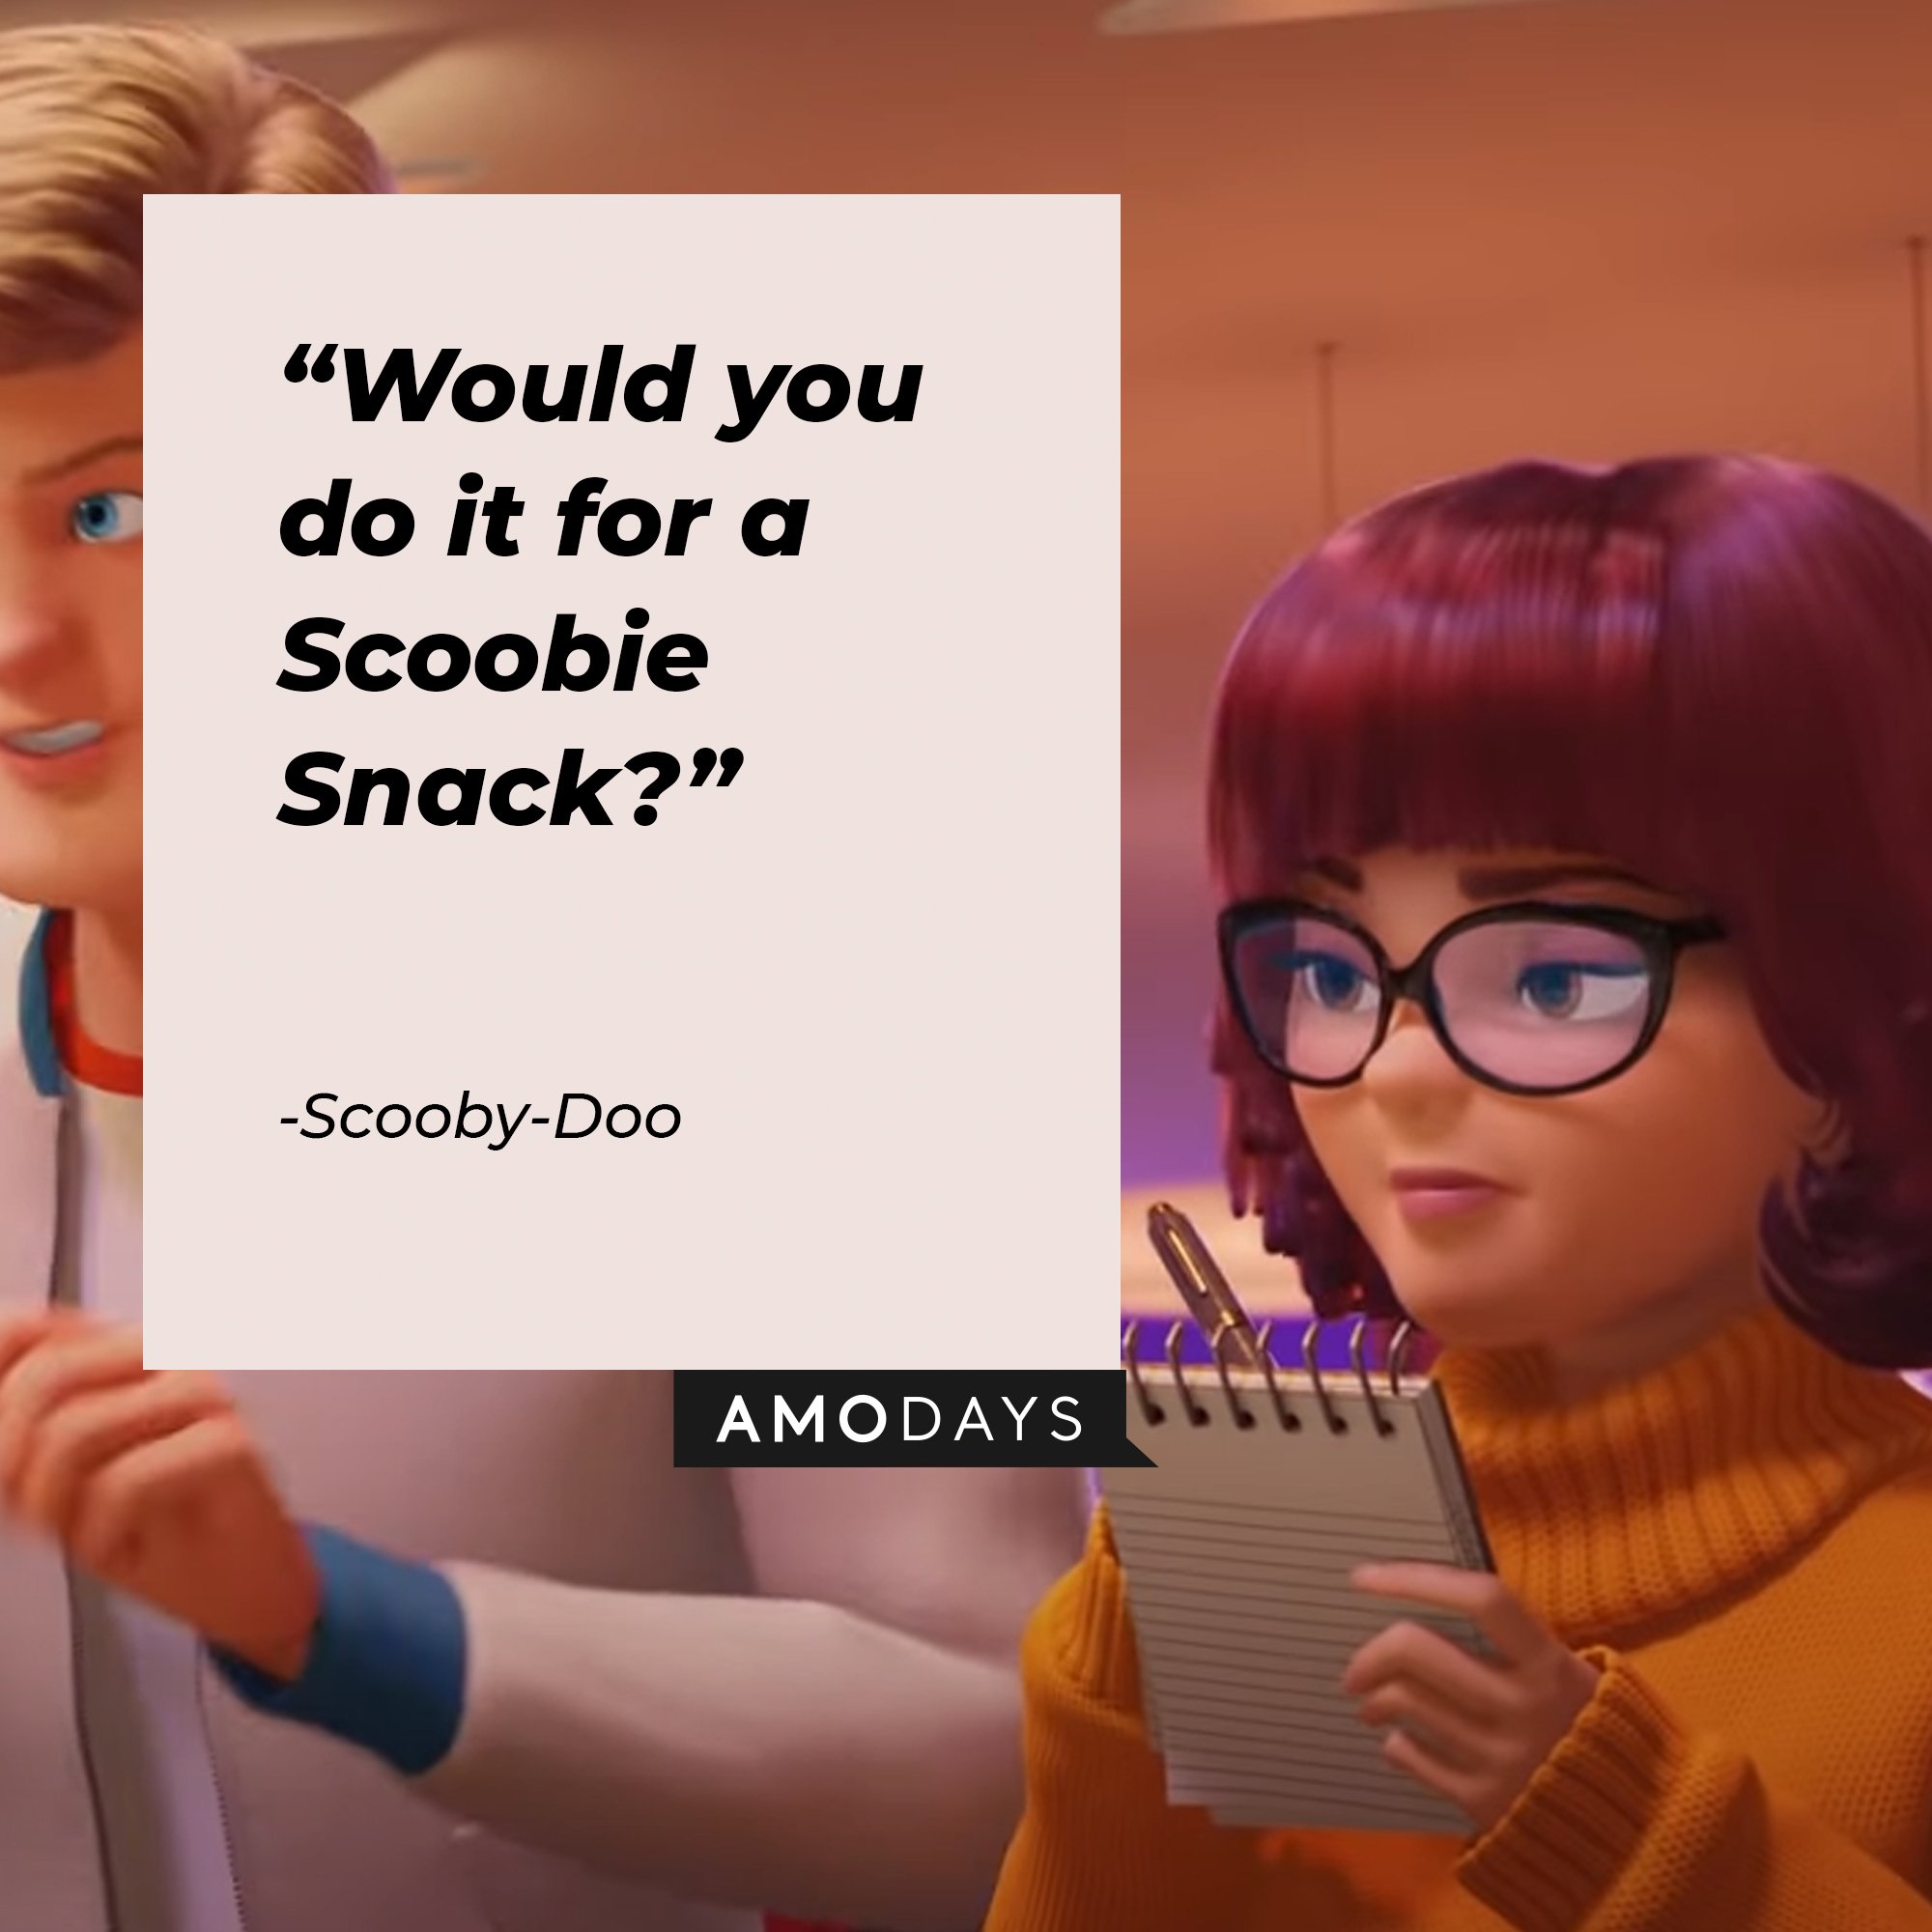 Daphne: “Would you do it for a Scoobie Snack?” | Image: AmoDays